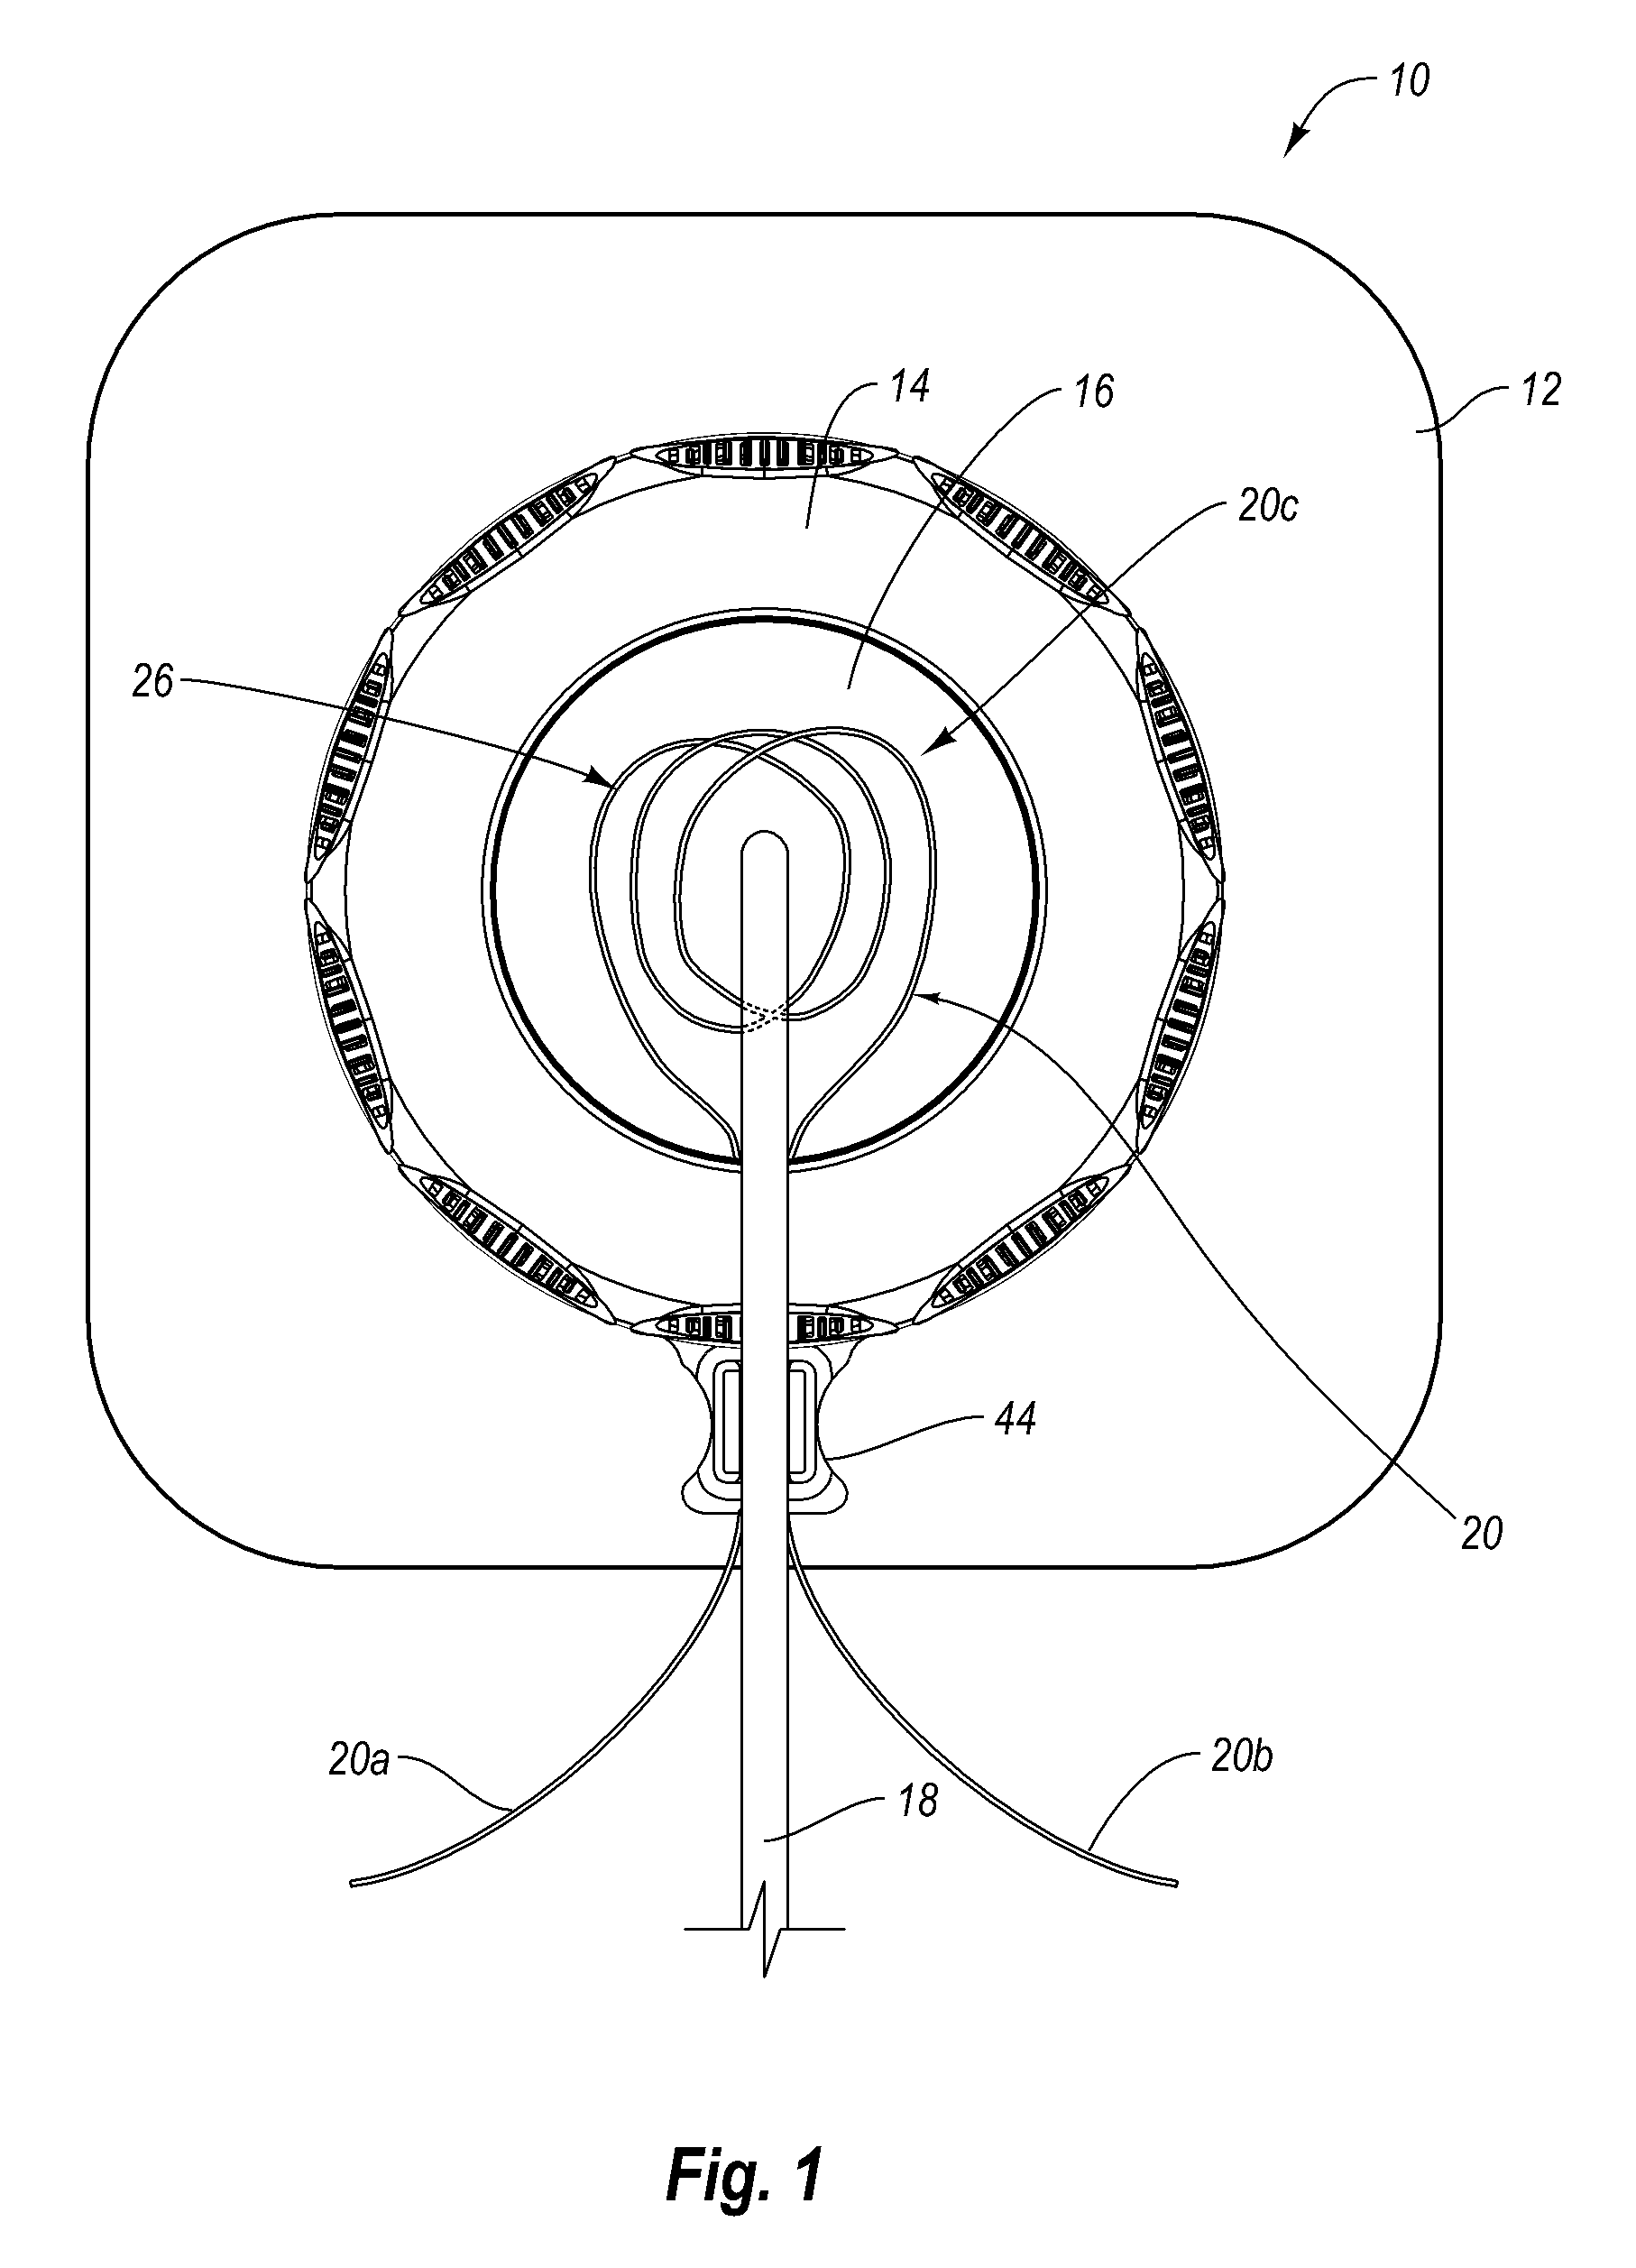 Self-suturing anchor device